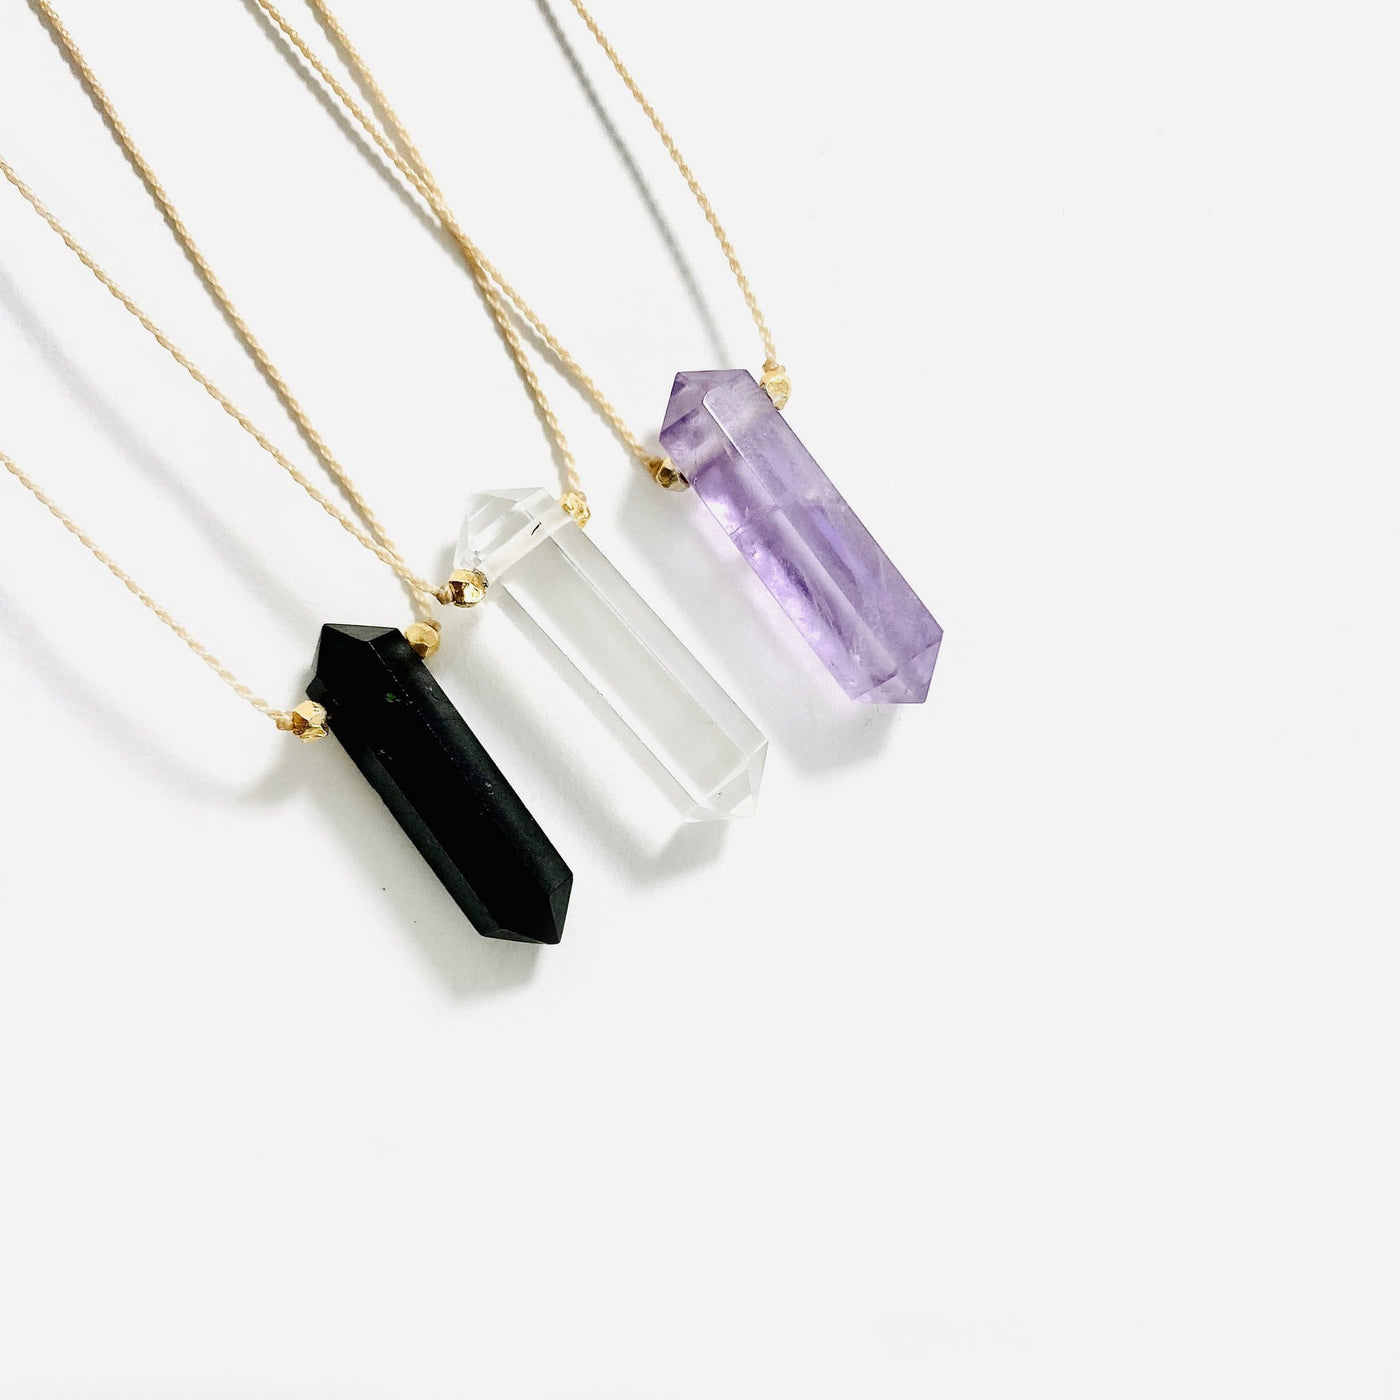 necklaces available in black tourmaline, crystal quartz and amethyst 